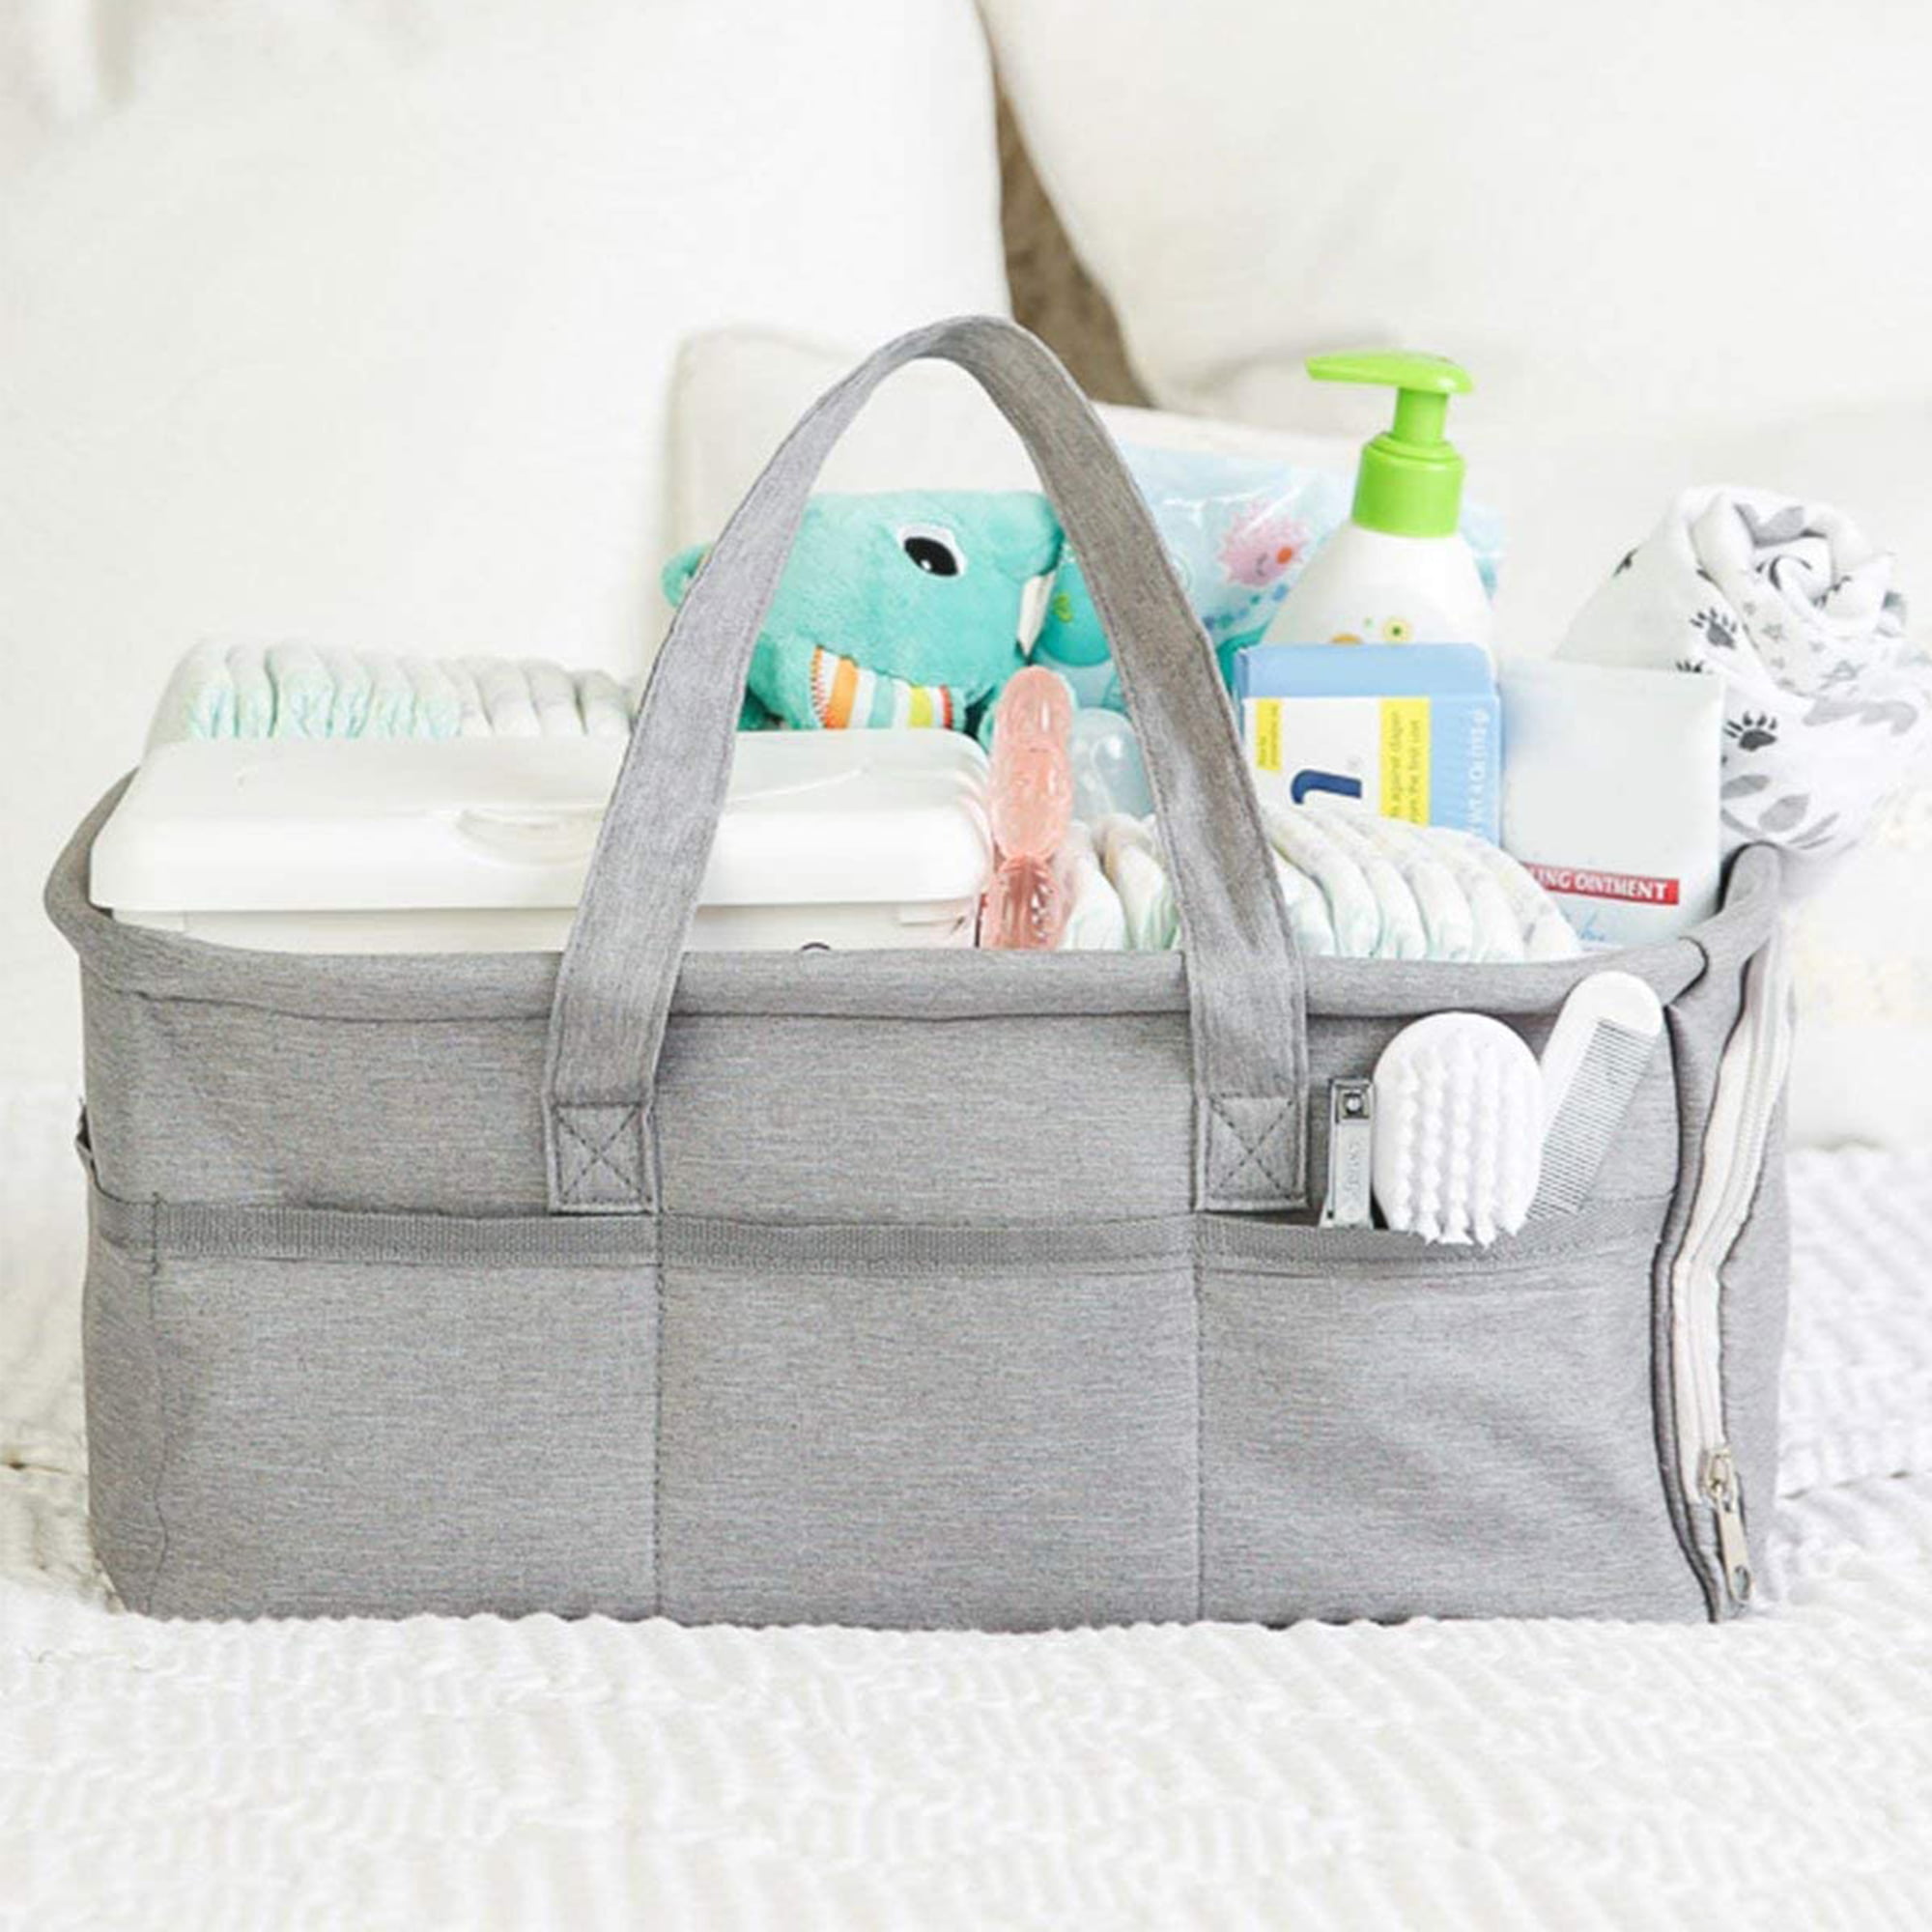 Wipes & Toys Bonanza-World Nappy Caddy for Baby Diapers Portable Sturdy Caddy with Detachable Dividers For Home & Travel. Felt Baby Caddy Organiser with Beautiful Design Compartments and Pockets